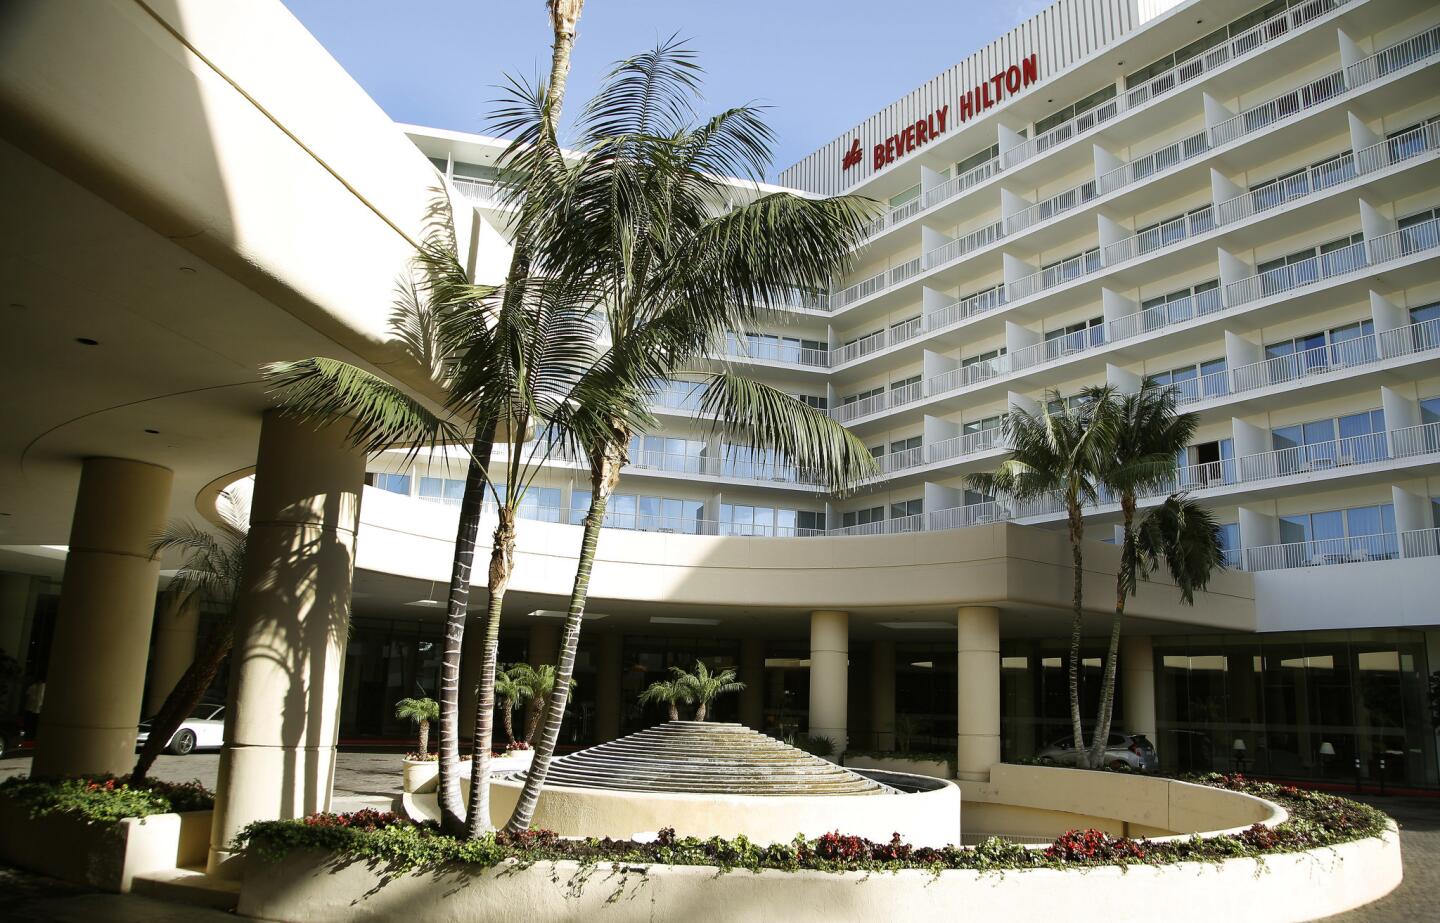 The Beverly Hilton Hotel is one of the hardest-working hotels in Hollywood, hosting events such as the Golden Globes and the Oscar luncheon.